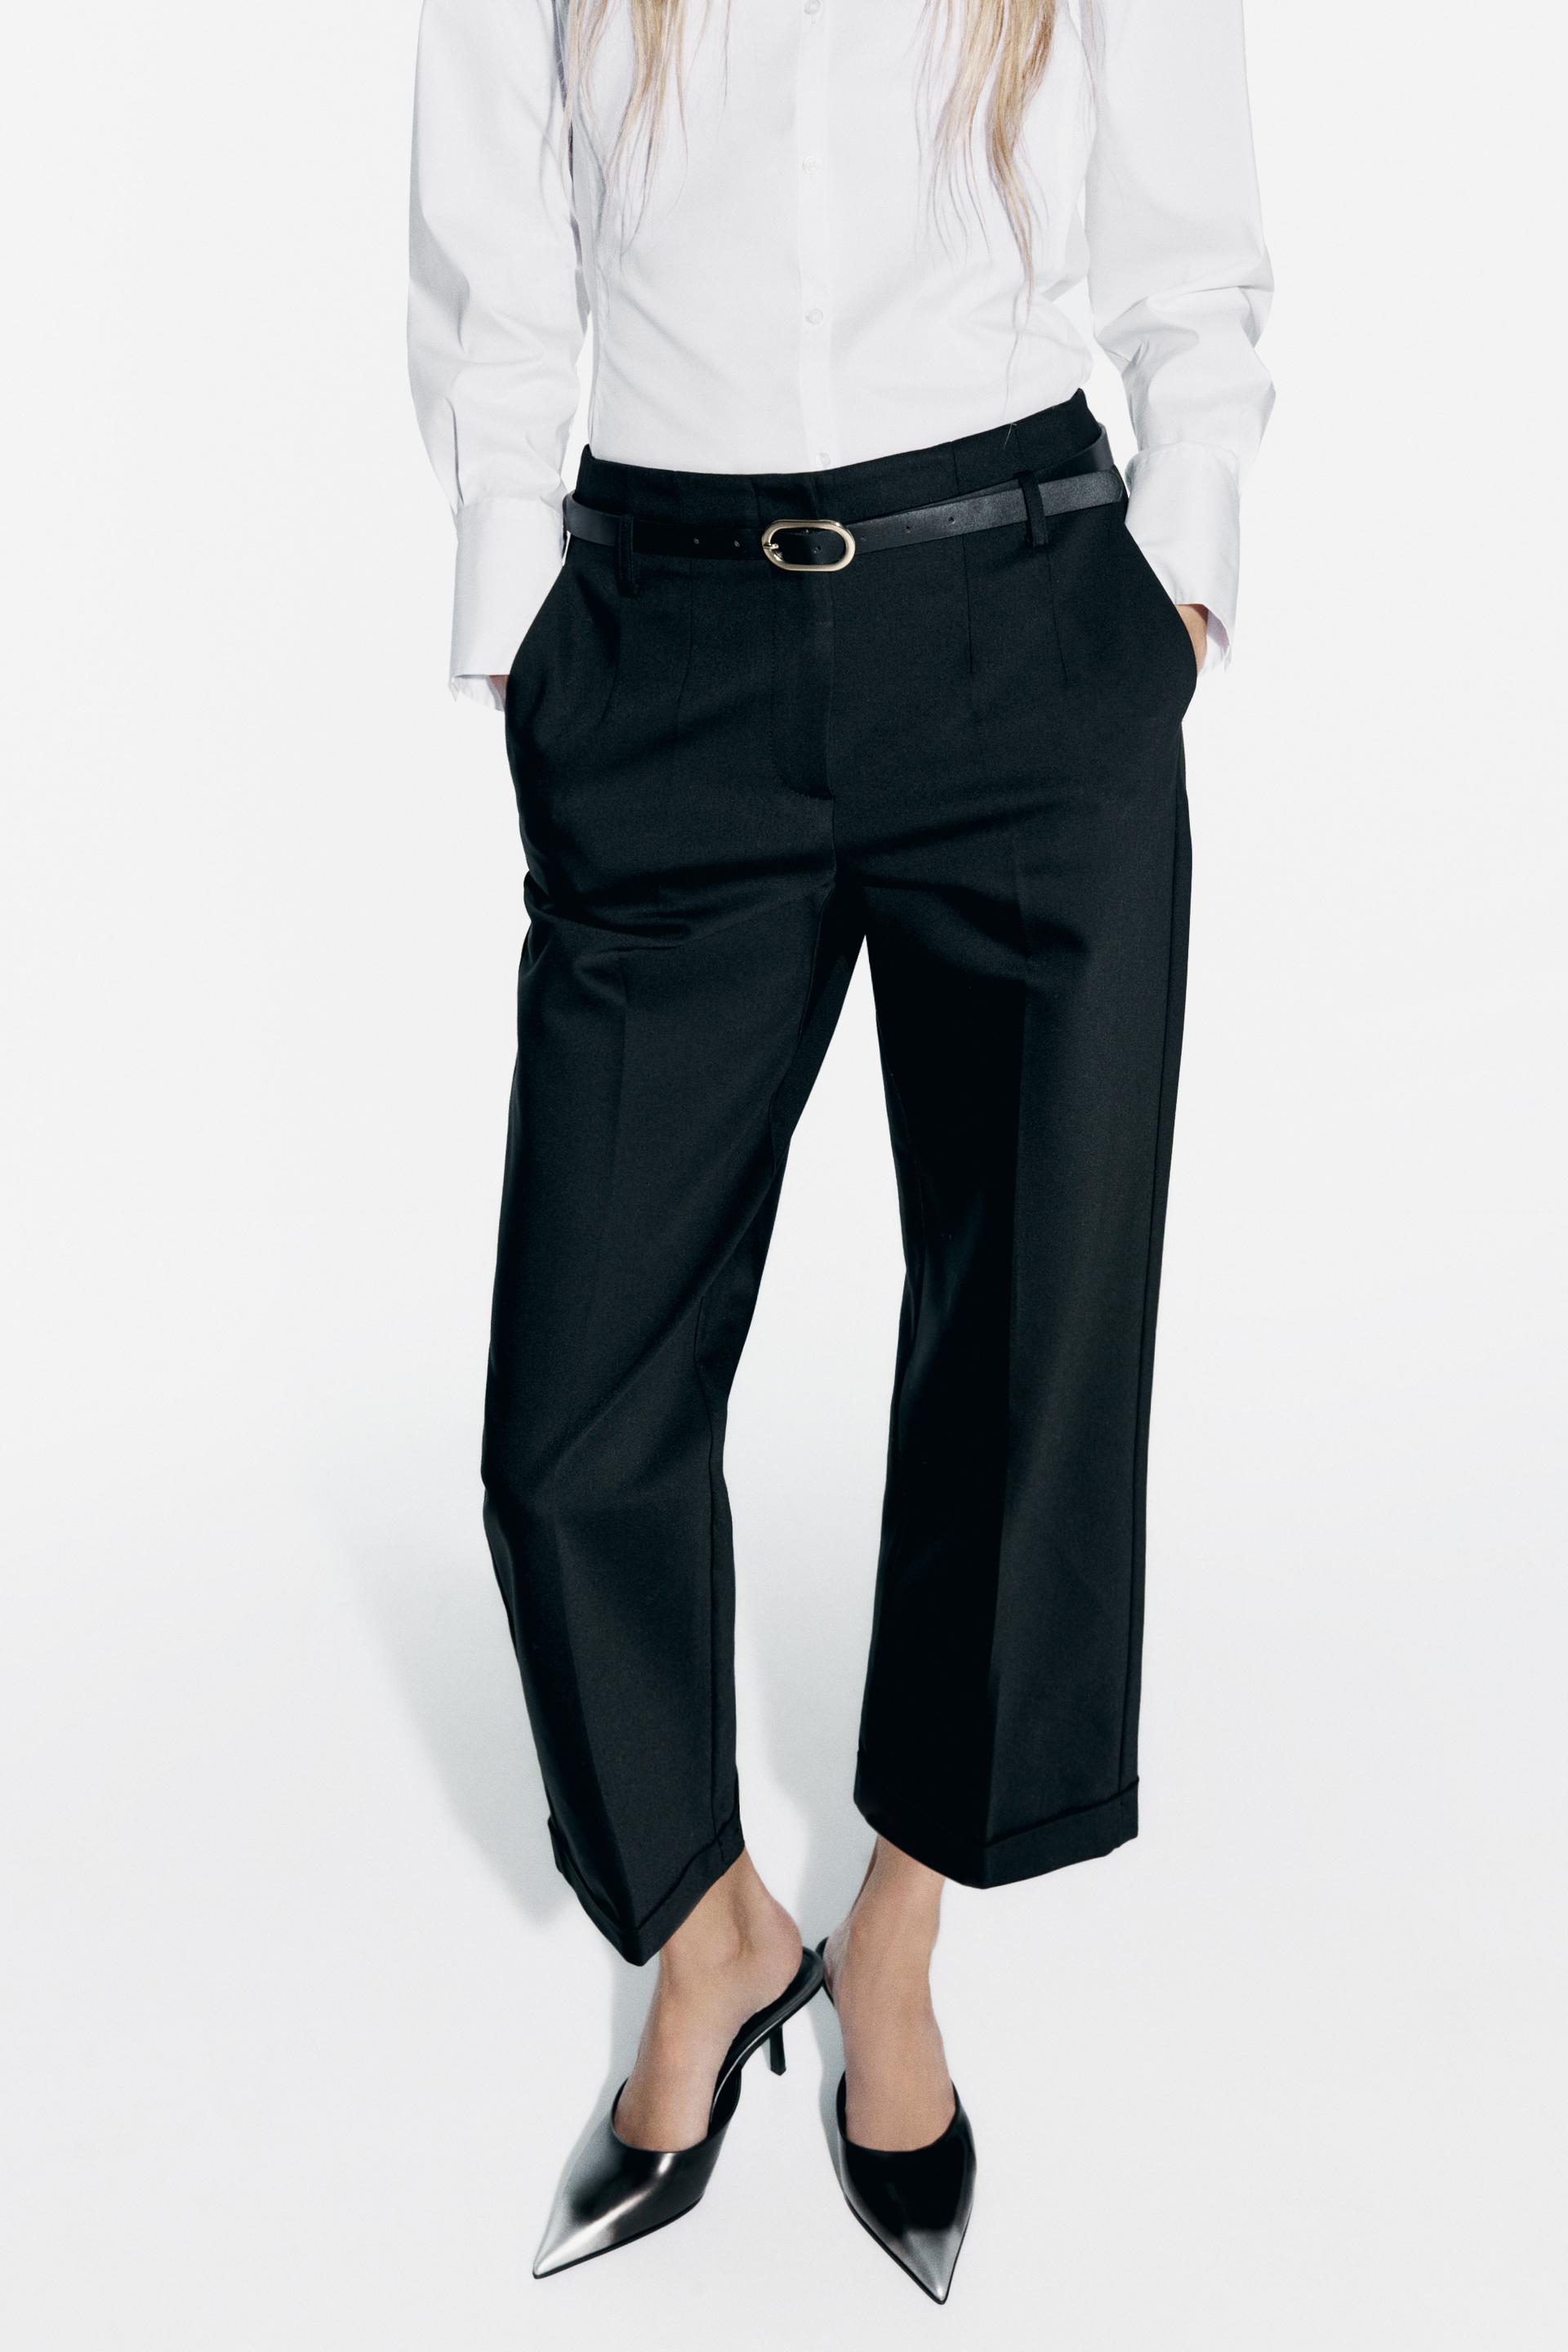 Zara Wide Leg Belted Pants  Colored pants outfits, Belted pants